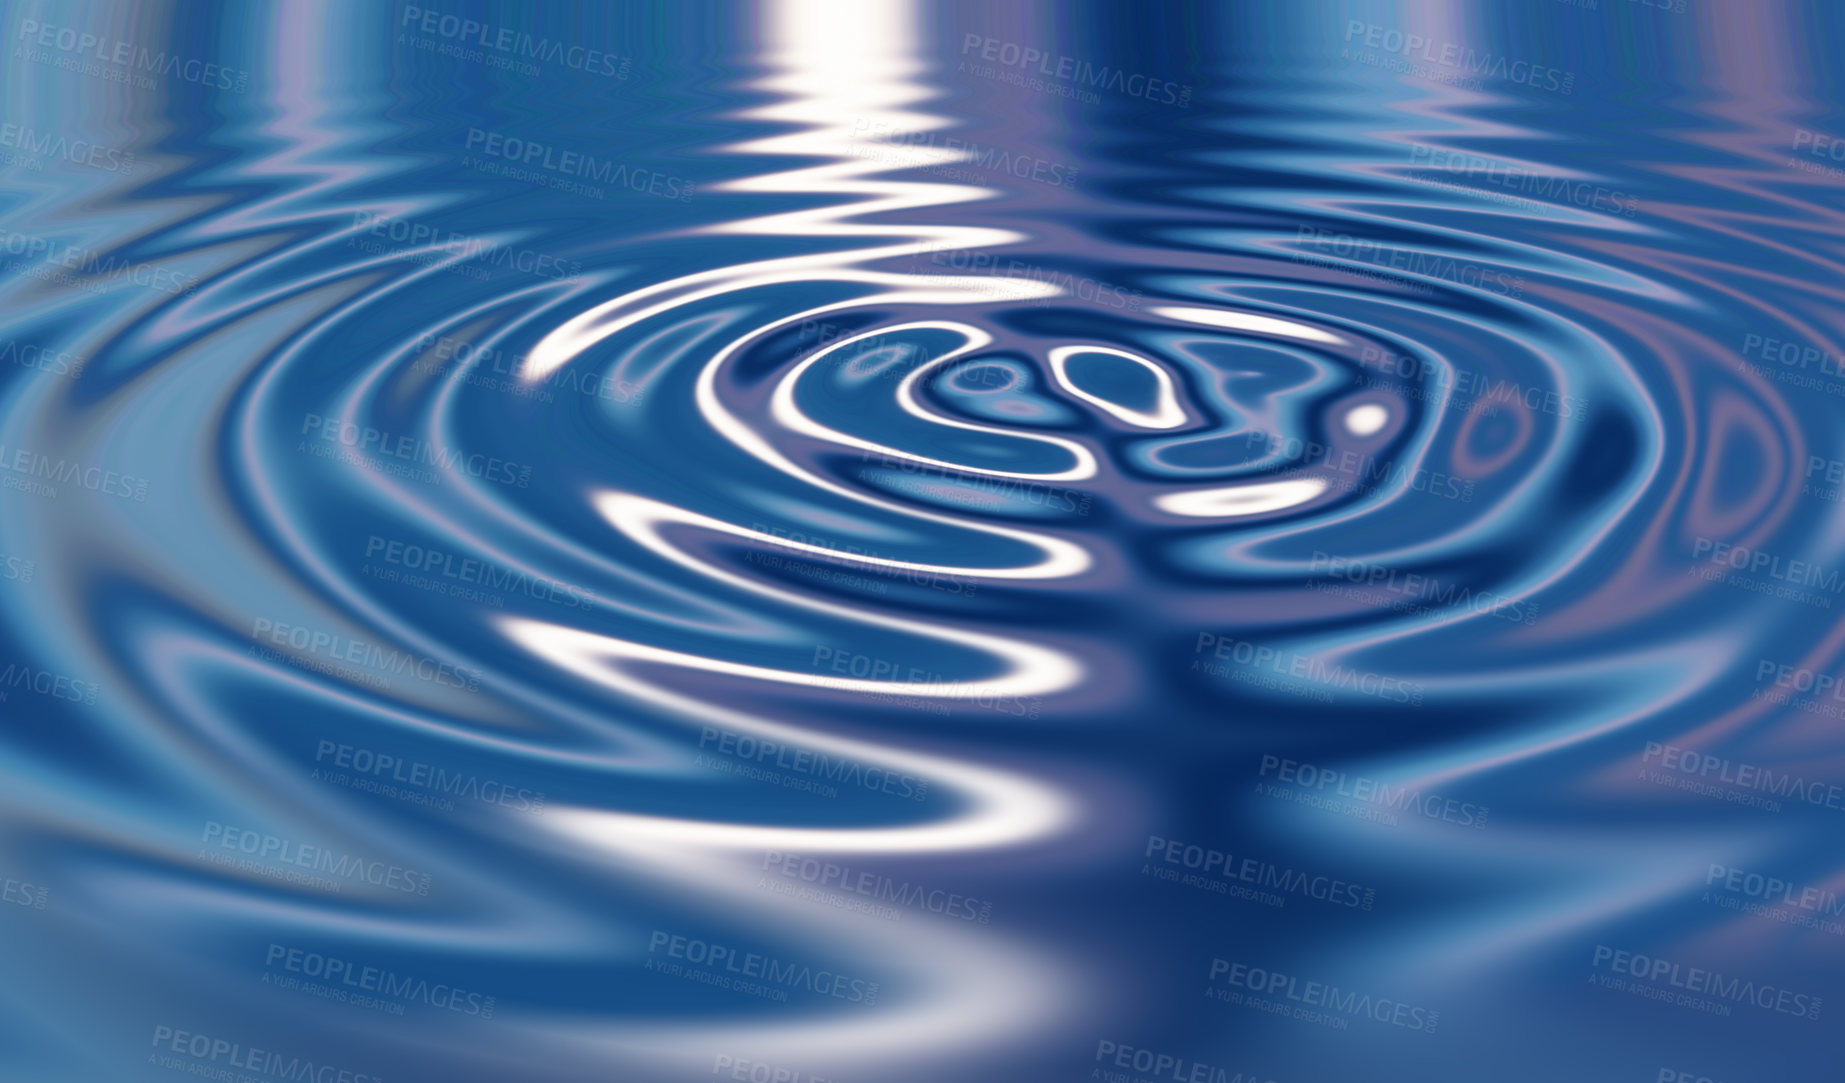 Buy stock photo 3D liquid ripples or VFX blue shiny waves substance with a metallic reflection on surface. Texture, movement and motion in a futuristic pool with glowing water for a vaporwave aesthetic background
